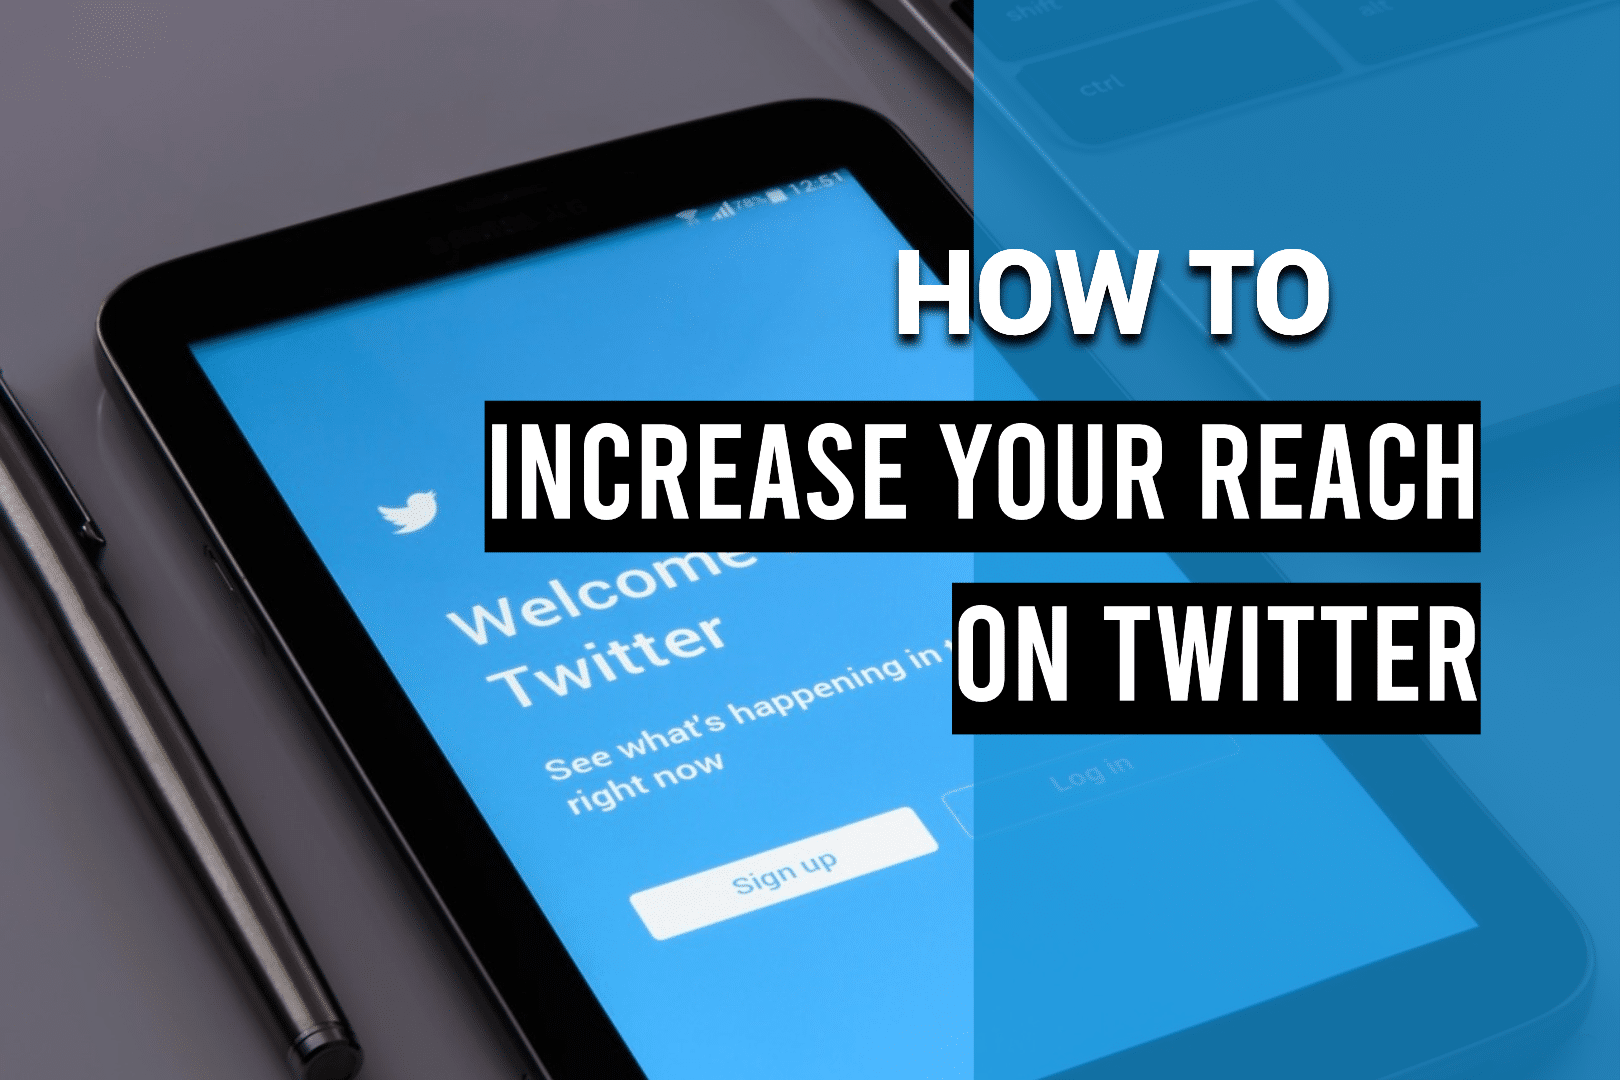 HOW TO INCREASE YOUR REACH ON TWITTER